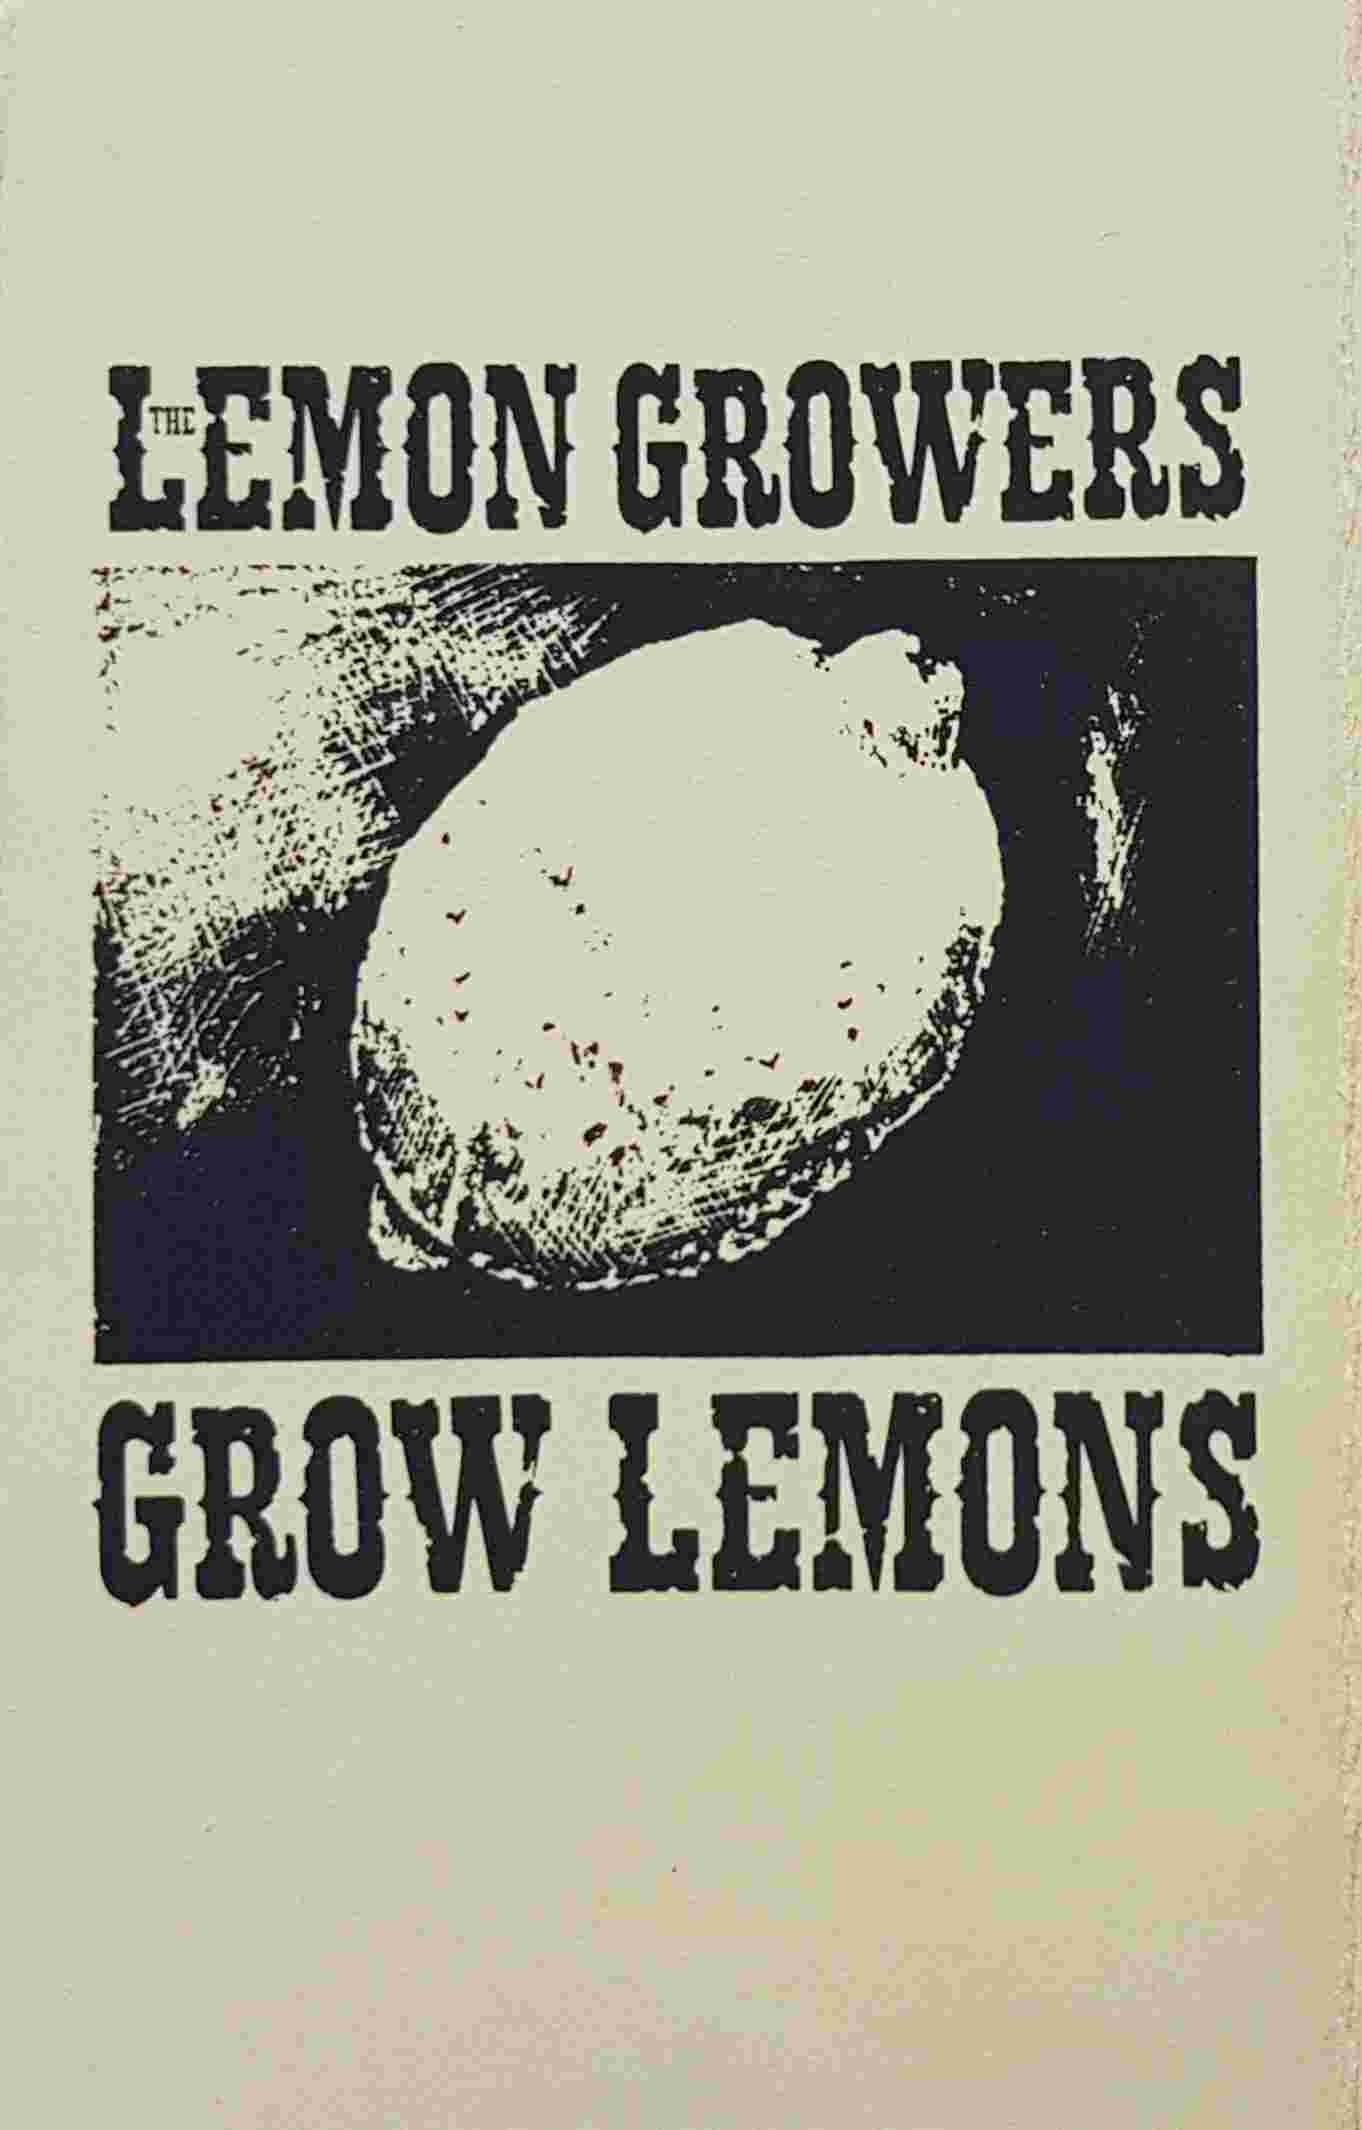 Picture of Grow Lemons by artist The Lemon Growers 